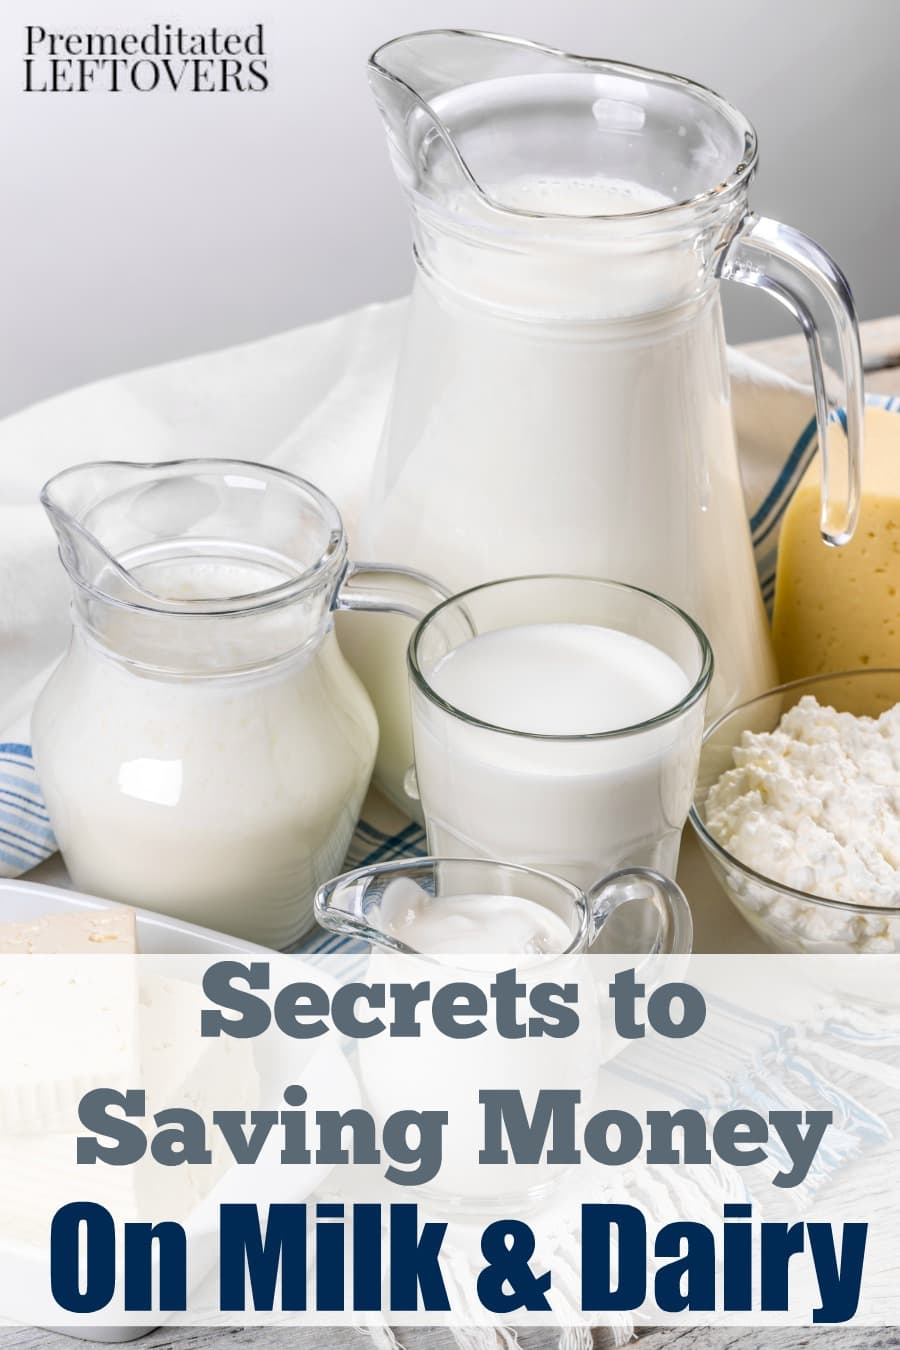 How to Save Money on Milk and Dairy - Tips for saving money on milk, butter, yogurt, cheese, and other dairy products to help you save on groceries.